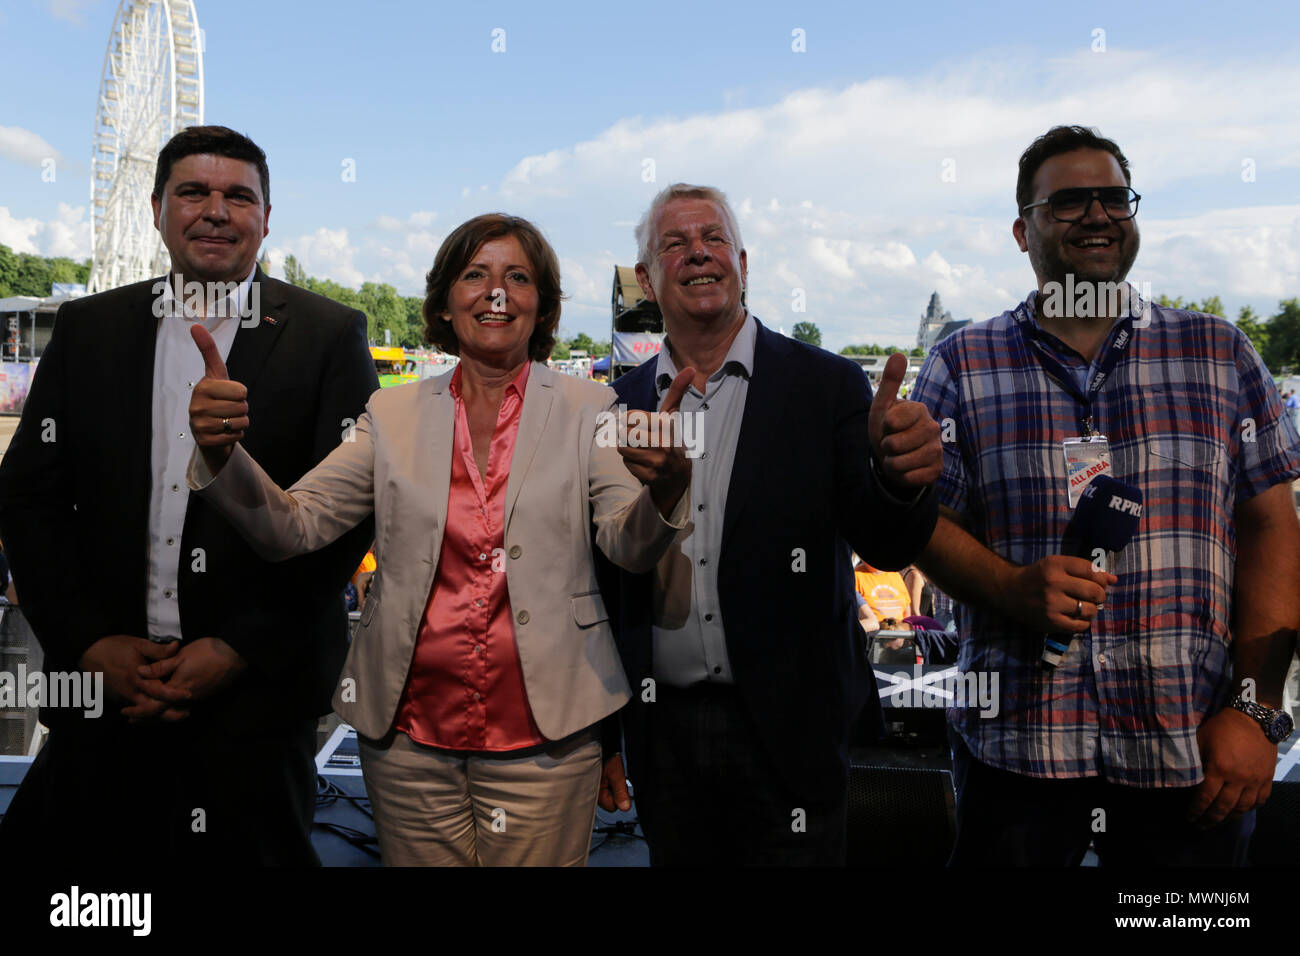 Worms, Germany. 1st June 2018. The Rhineland-Palatinate Minister?President Malu Dreyer (2nd left) and the Lord Mayor of Worms, Michael Kissel (2nd right), officially open the Rheinland-Pfalz-Tag 2018. Around 300.000 visitors are expected in the 34. Edition of the Rheinland-Pfalz-Tag (Rhineland-Palatinate Day) in Worms. The Rheinland-Pfalz-Tag is a annual event that showcases the German state of Rhineland-Palatinate. Credit: PACIFIC PRESS/Alamy Live News Stock Photo